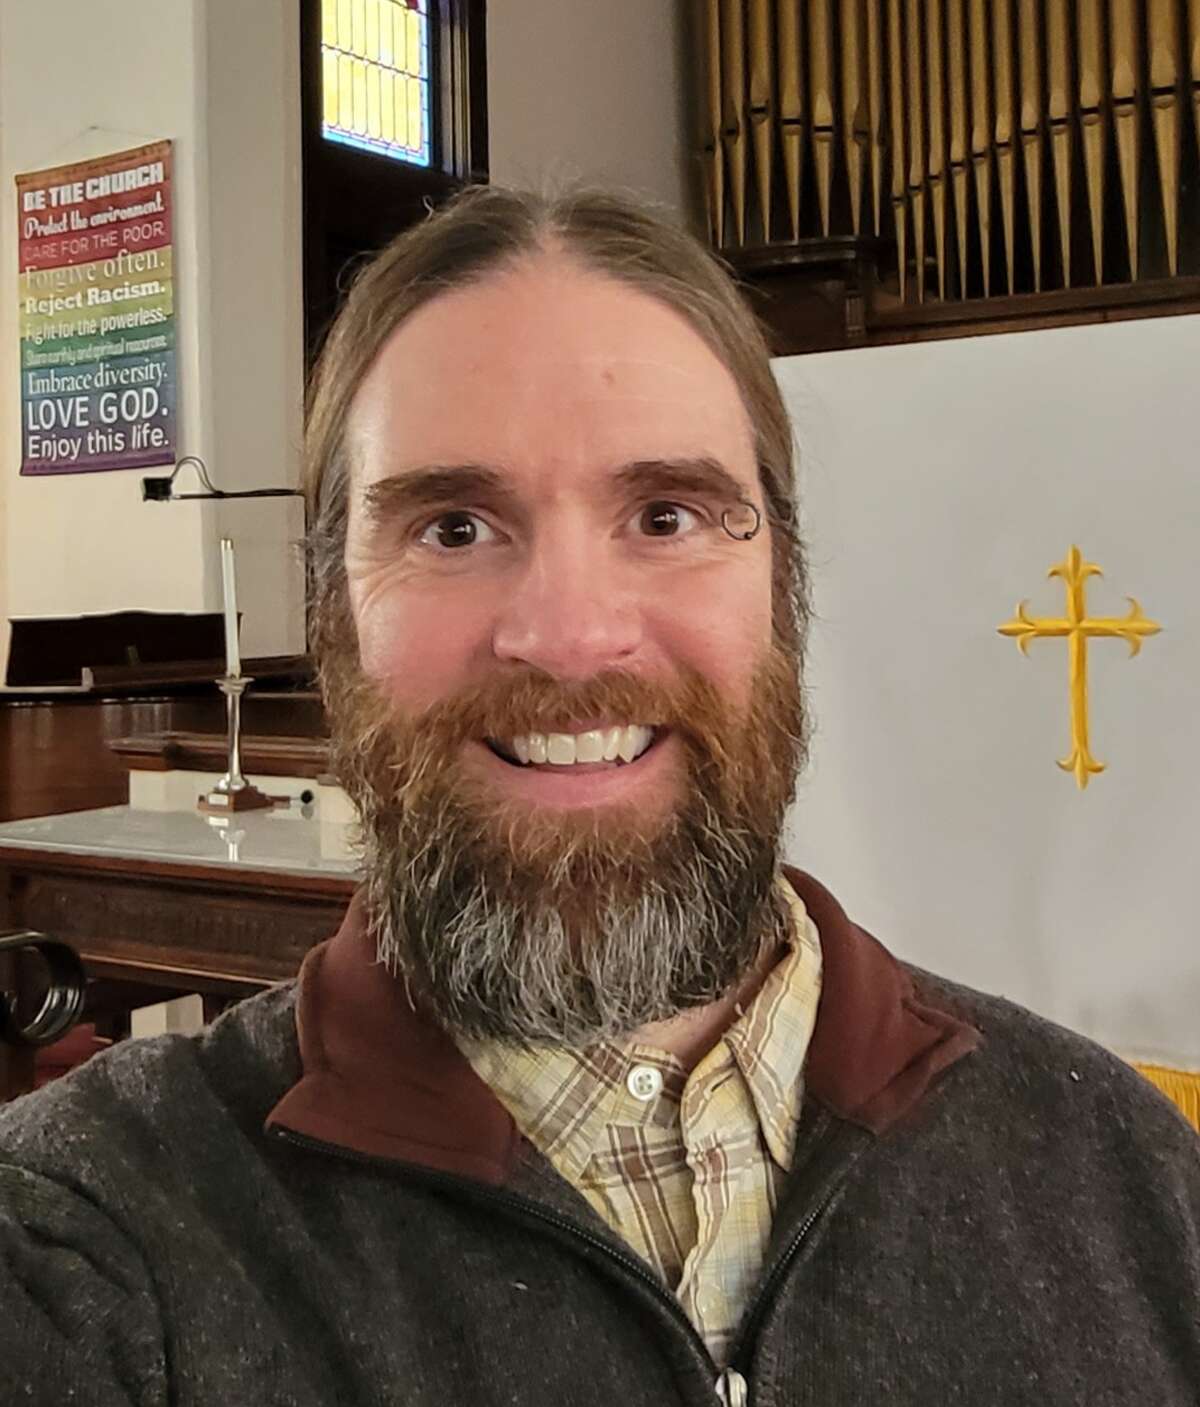 The Rev. Ryan Gackenheimer is pastor at the First Congregational Church of Bethel, United Church of Christ.